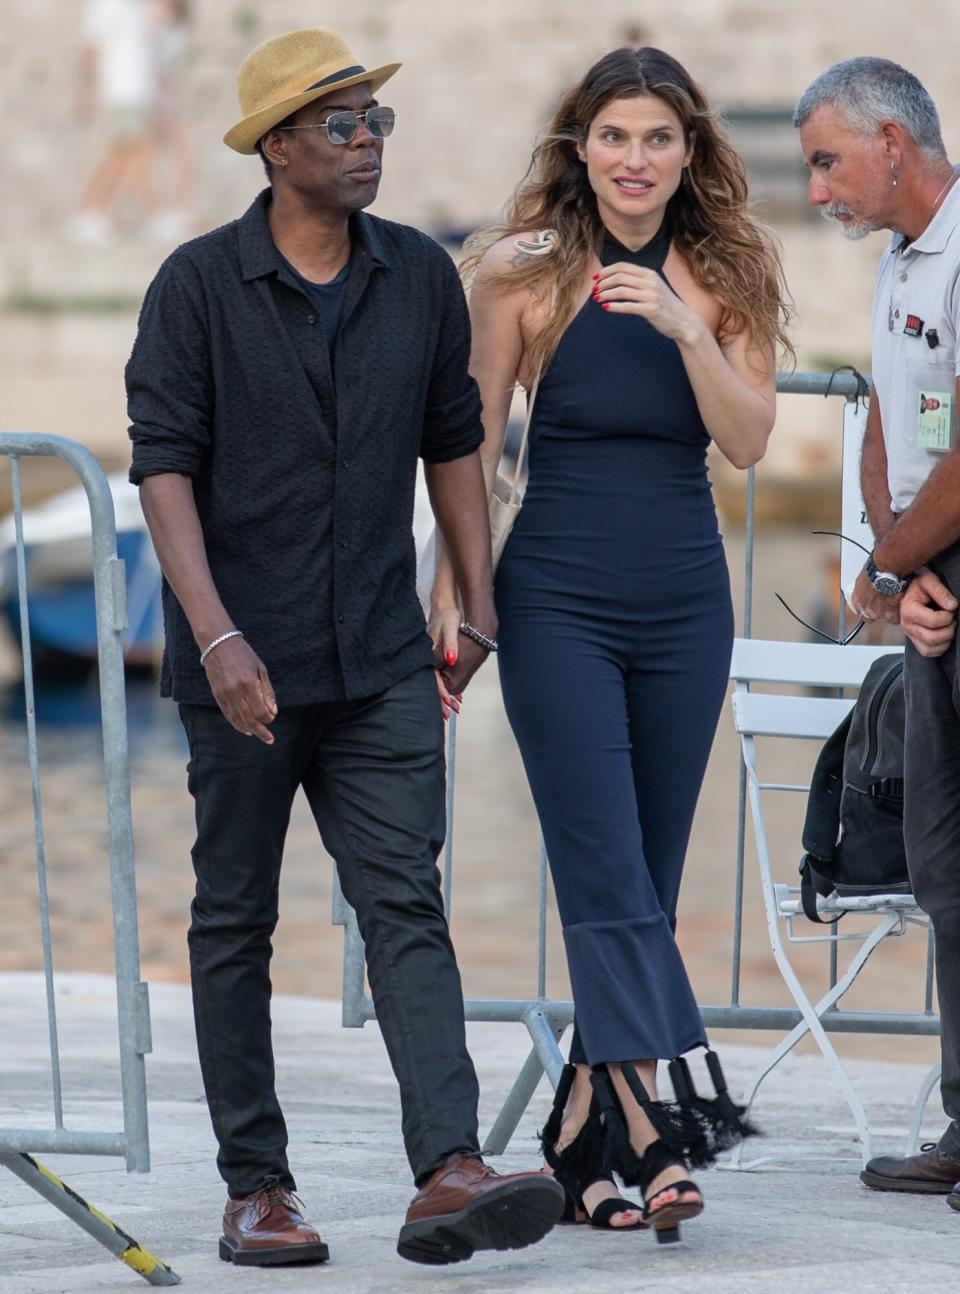 Chris Rock decided to take a walk around town with his new girlfriend, actress Lake Bell